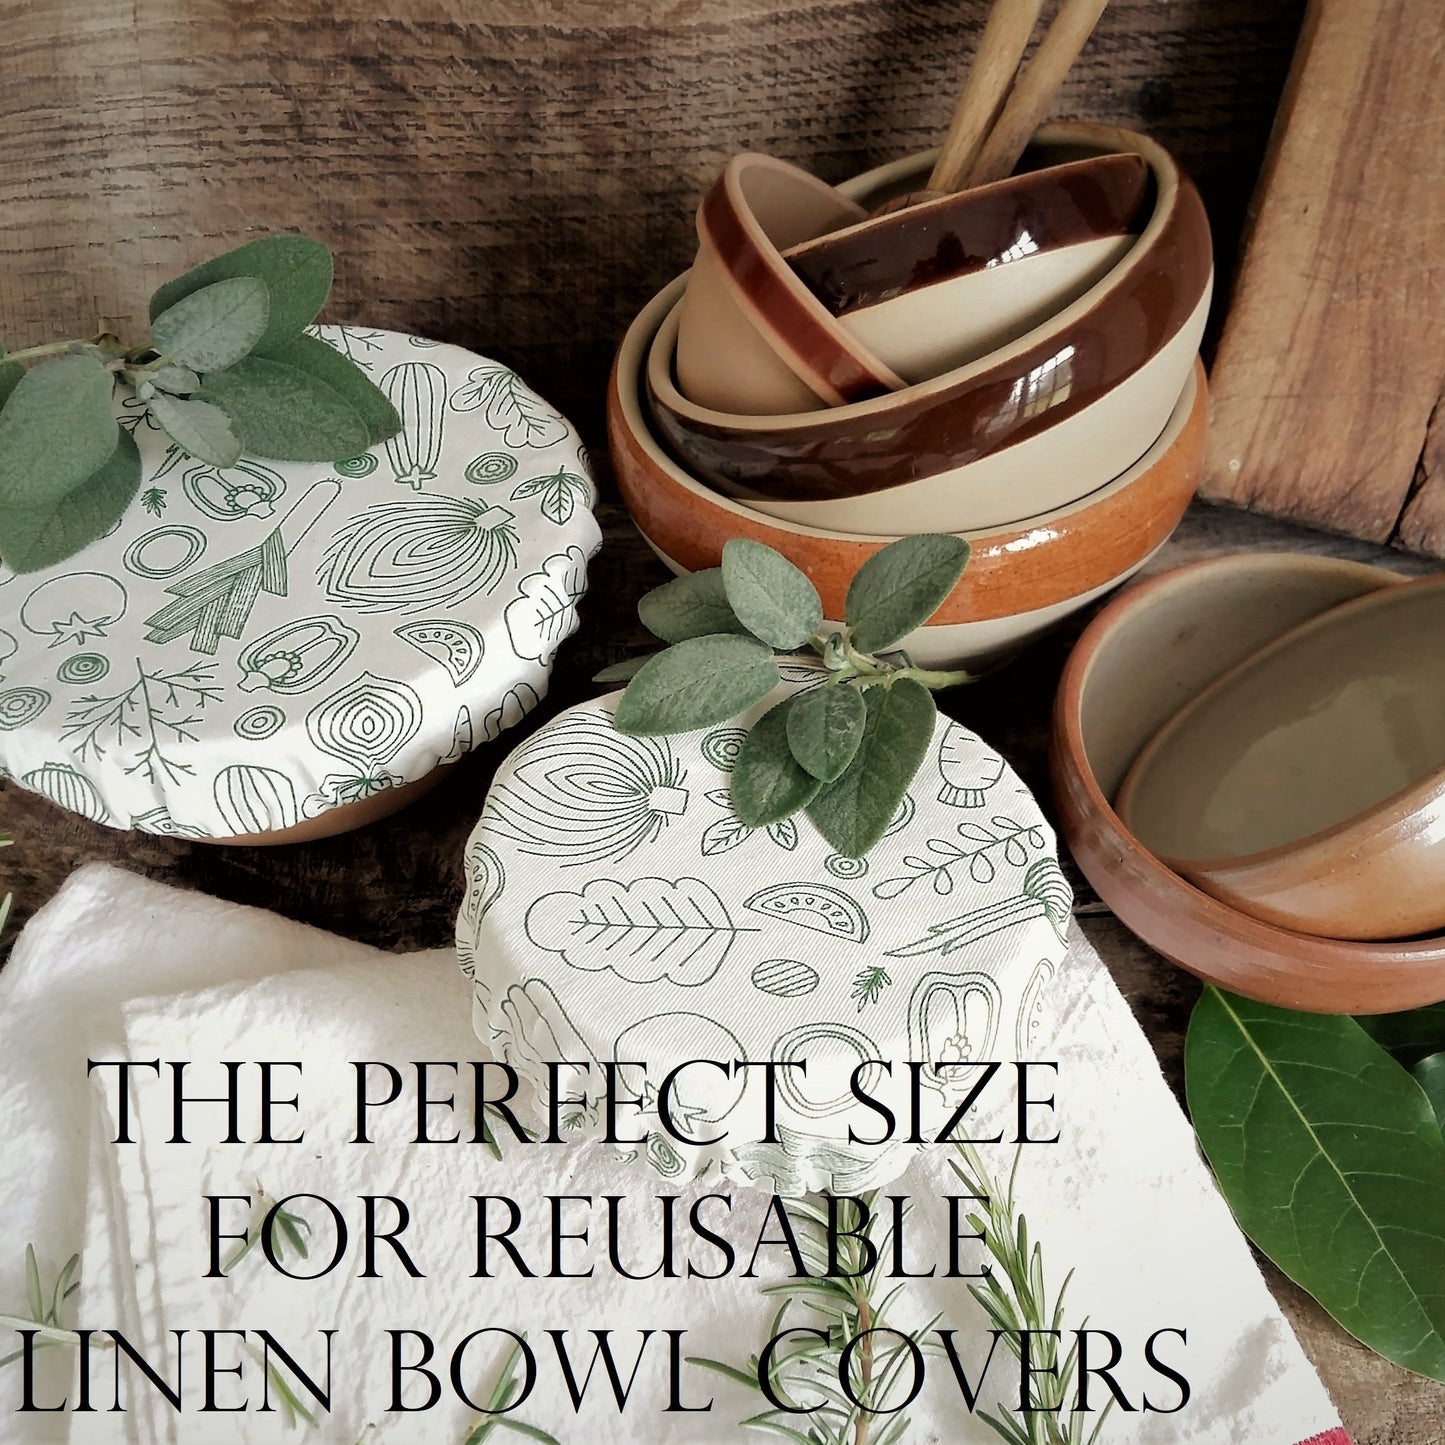 Set of EIGHT Confit Bowls from Tiggy & Pip - Just €168! Shop now at Tiggy and Pip